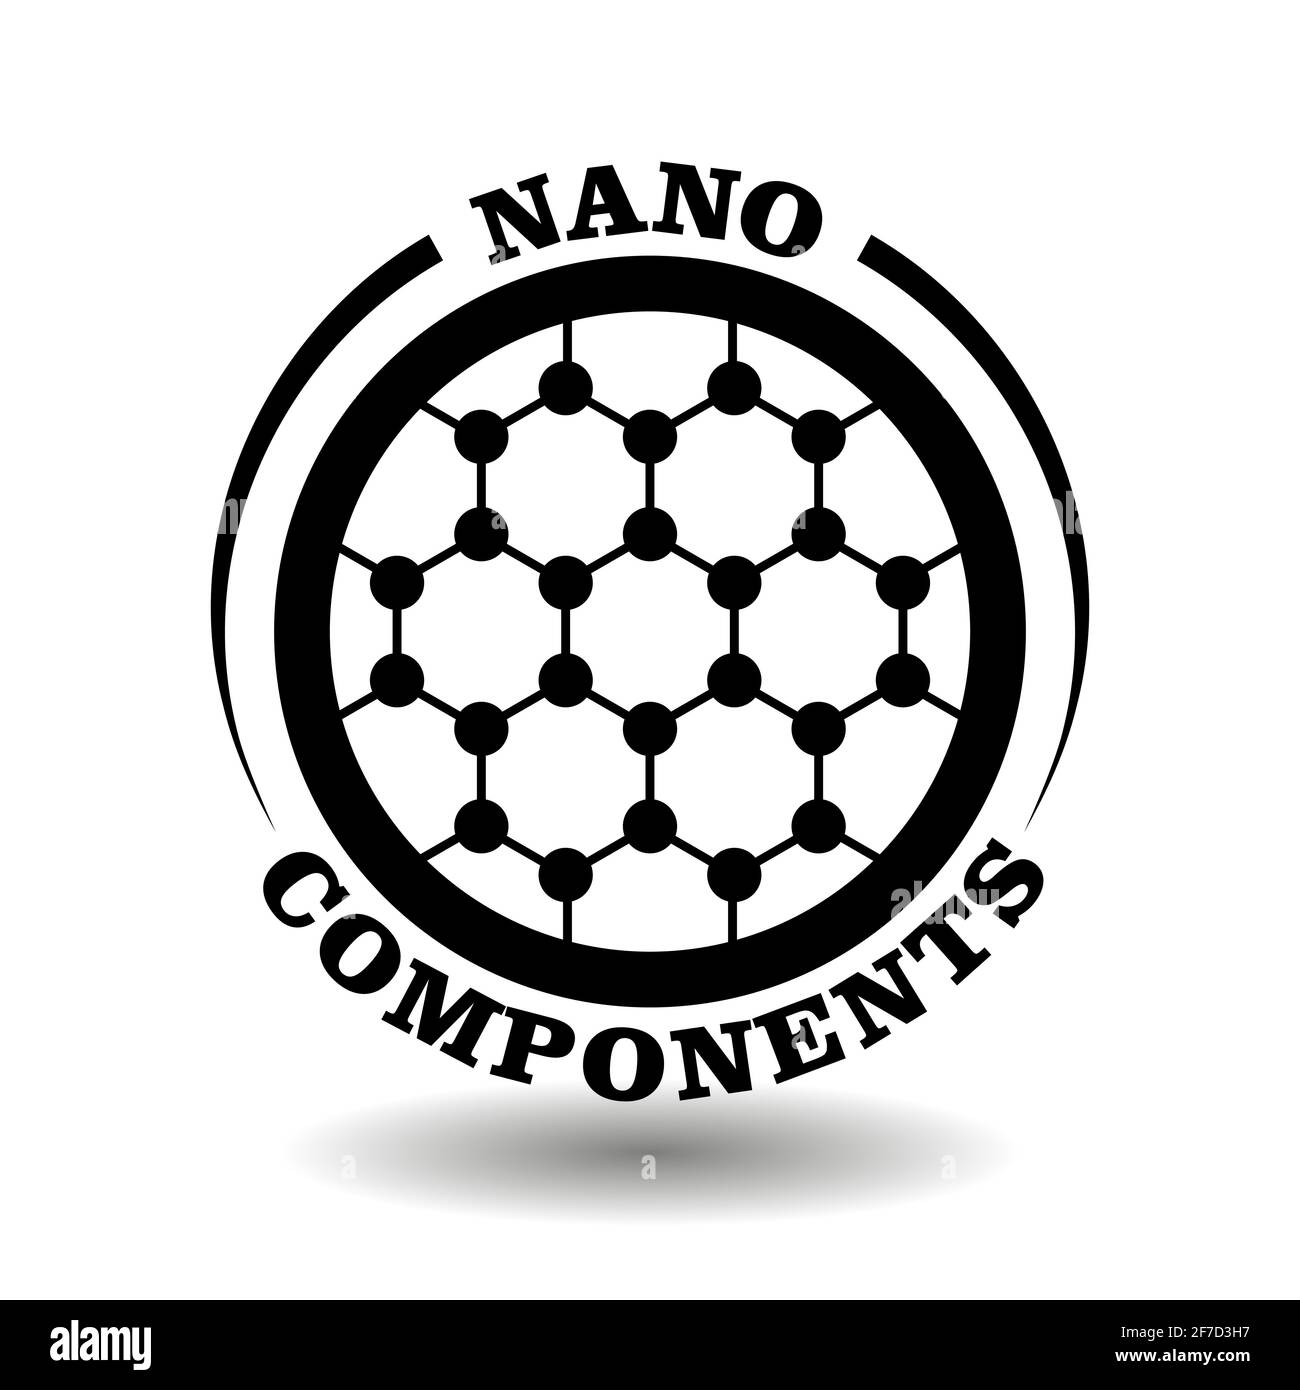 Round creative logo of Nanotechnology components for labeling modern nano science products, with abstract chemical formula symbol in circle icon Stock Vector